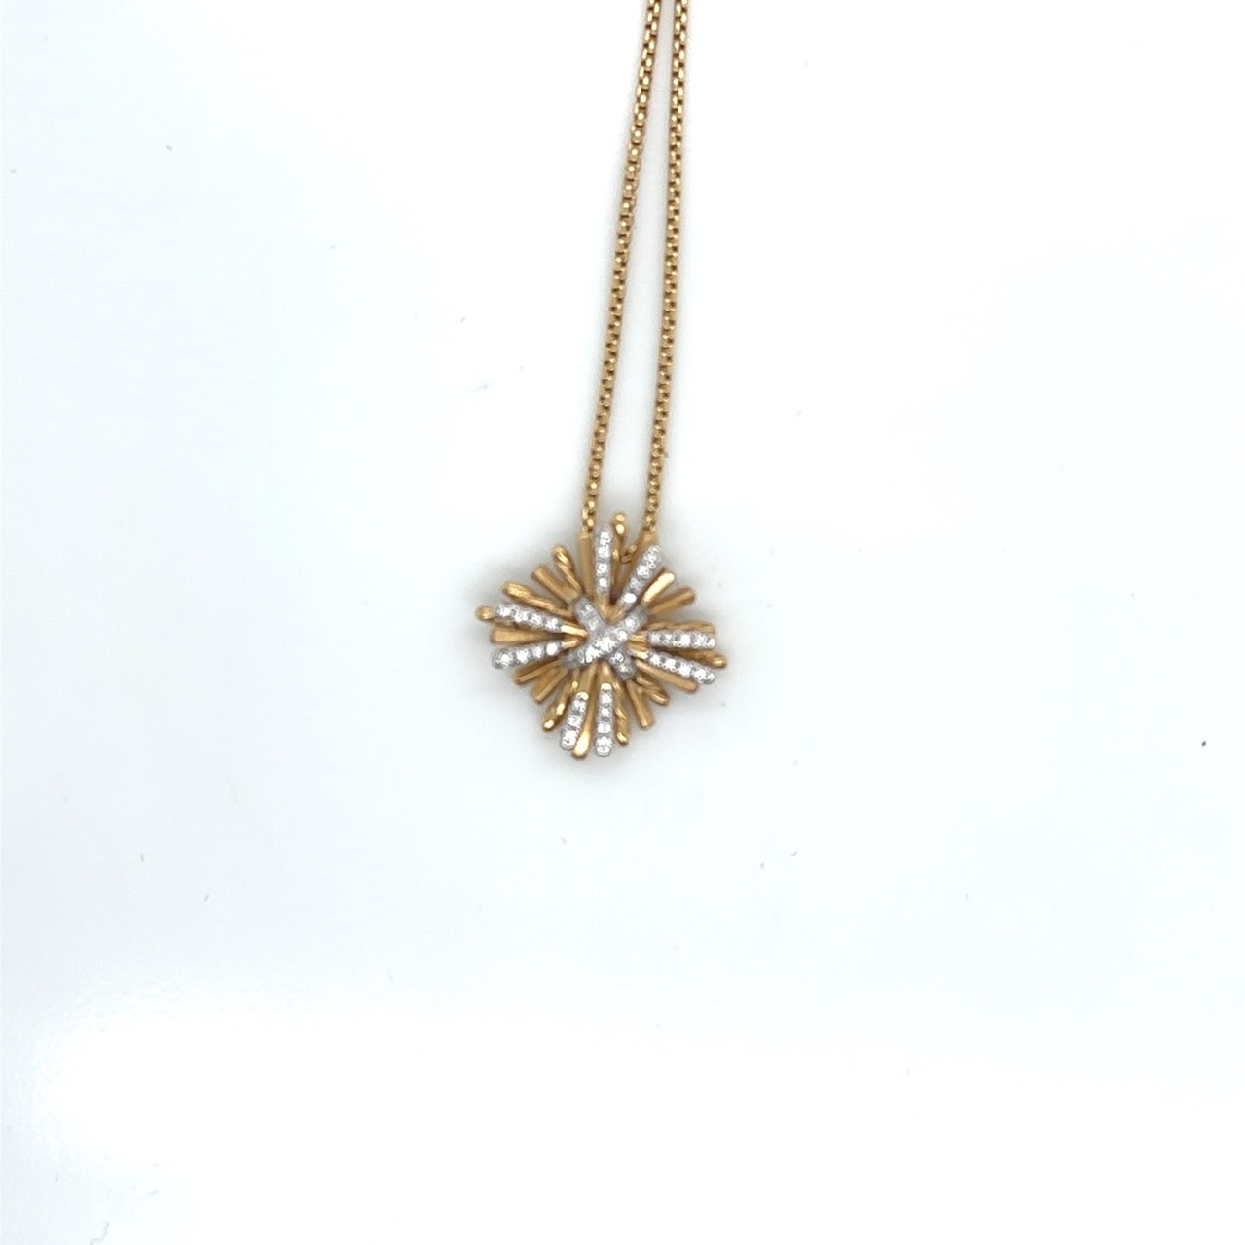 18K Yellow and White Gold David Yurman Starburst Necklace with Diamond Accents 18   Adjustable 